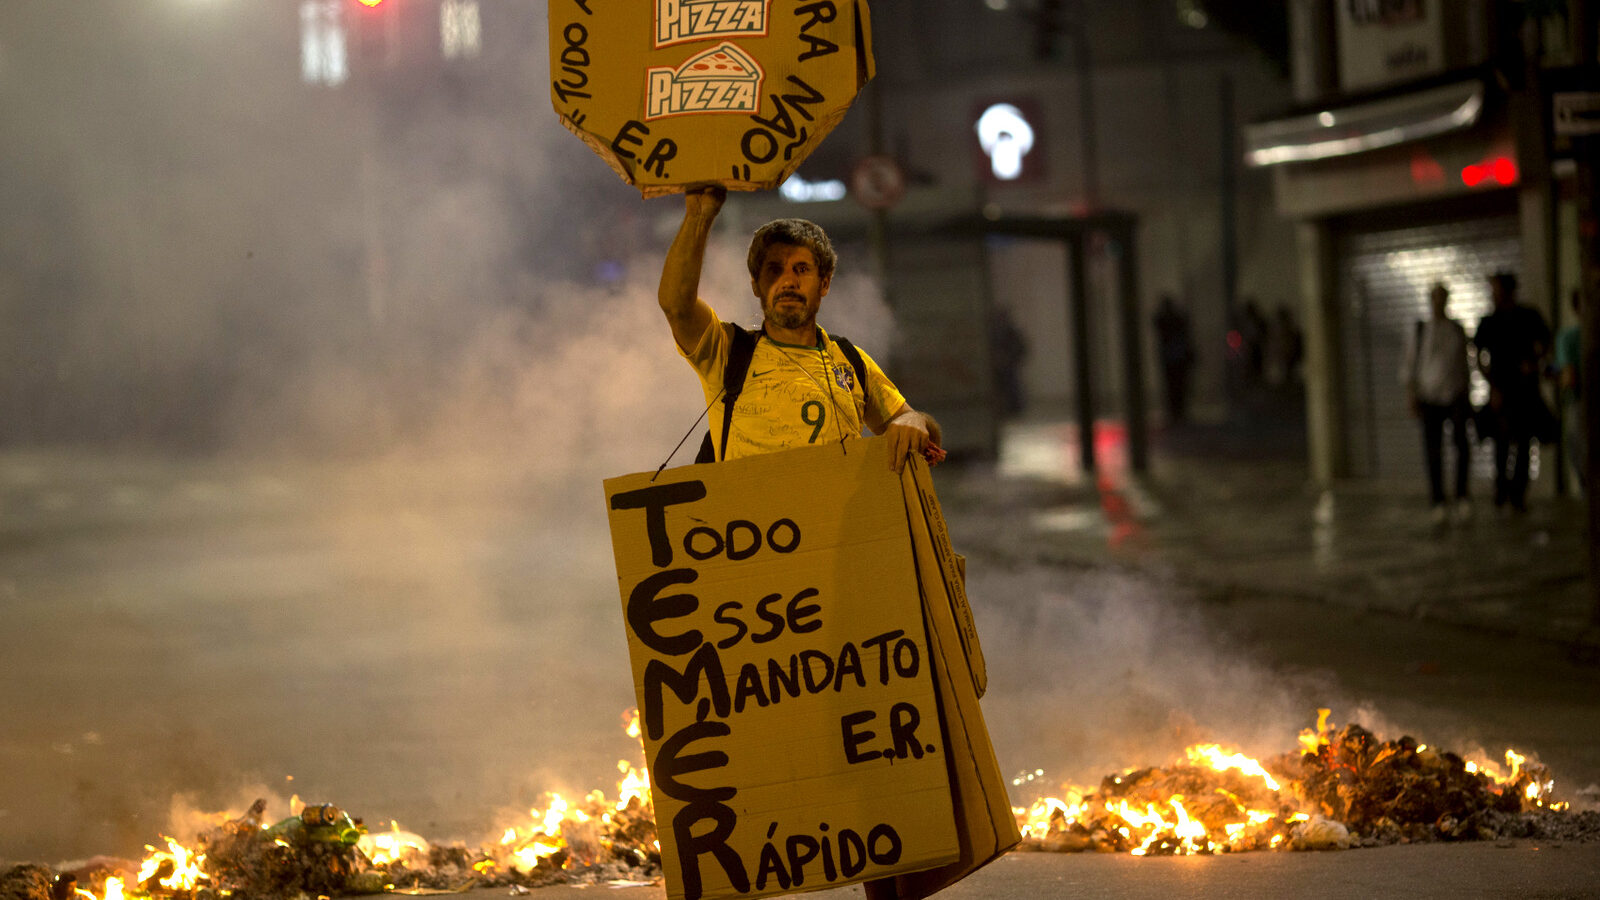 A demonstrator holds a sign against Brazil's President Michel Temer at a burning road block set up by protesters in Rio de Janeiro, Brazil, Thursday, May 18, 2017. Temer rejected calls for his resignation, saying he will fight allegations that he endorsed the paying of hush money to a former lawmaker jailed for corruption. The signs read in Portuguese "His entire mandate will be quick," and "Not this time. It all ends in pizza," meaning there will be consequences for Temer. (AP/Silvia Izquierdo)